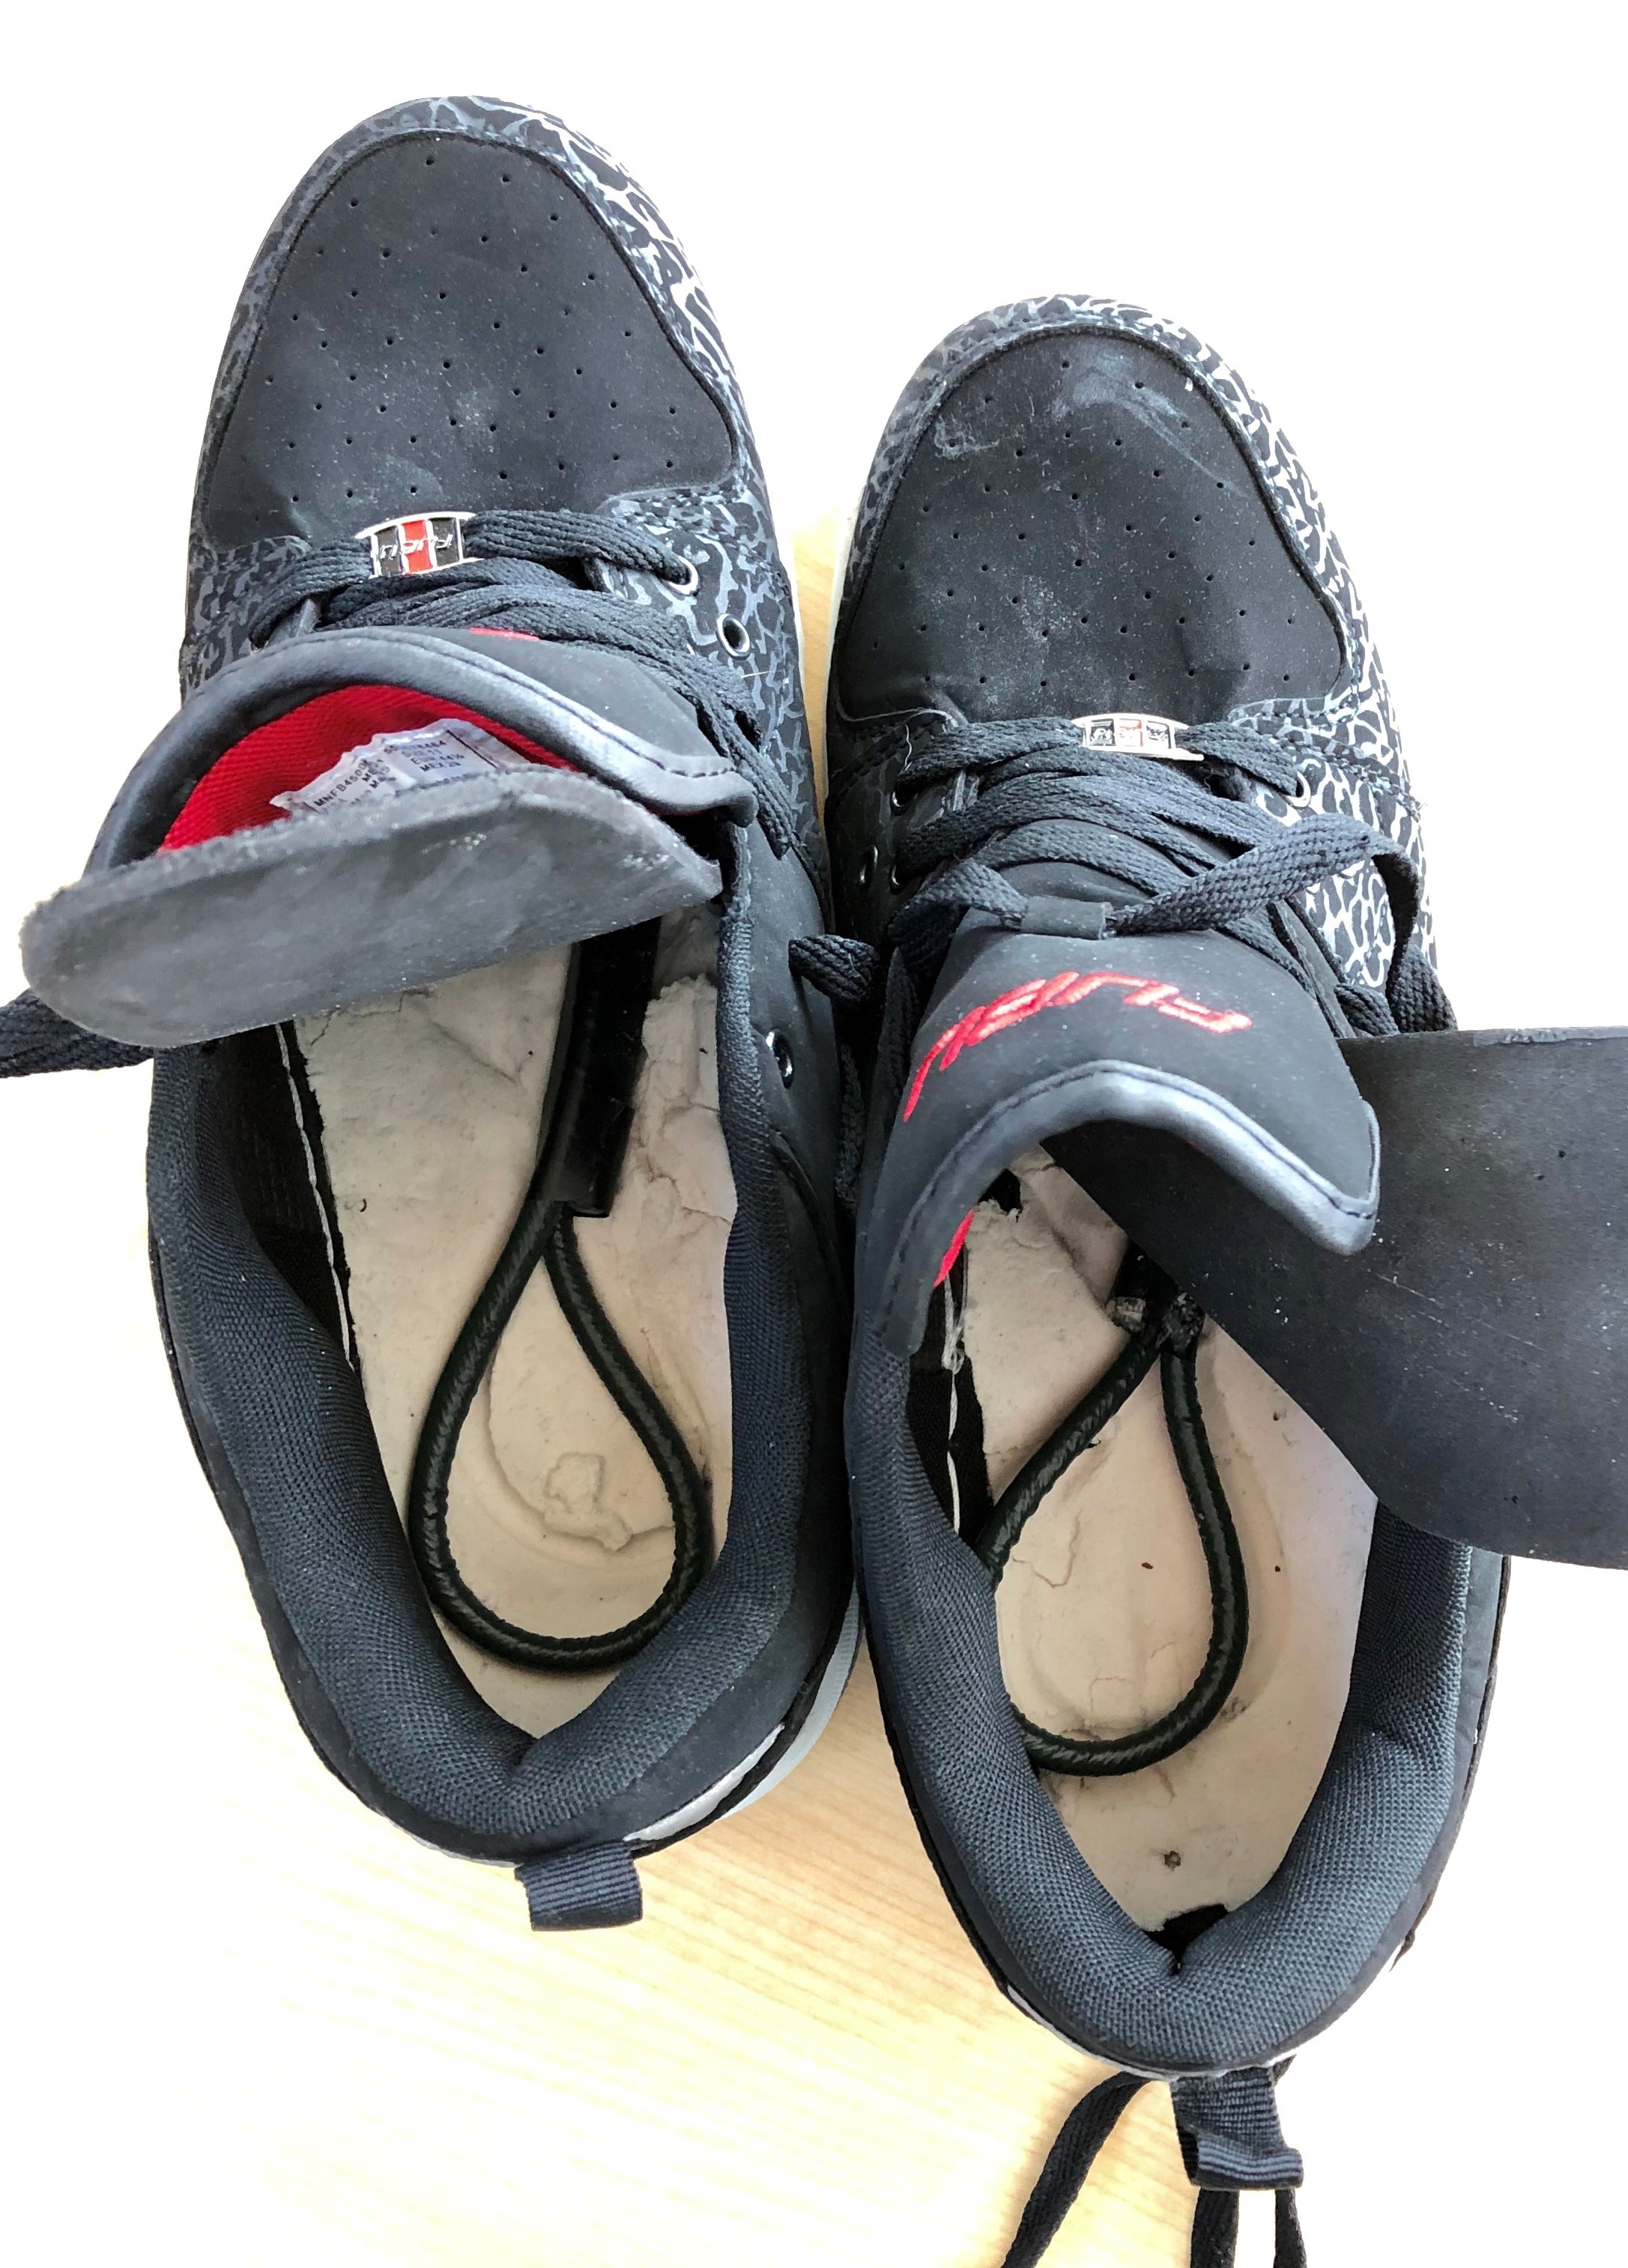 This is a pair of shoes with explosives concealed inside. They are used as training aids for TSA officers at Burlington International Airport. TSA requires travelers remove their shoes to ensure that there is nothing concealed inside. (TSA photo)